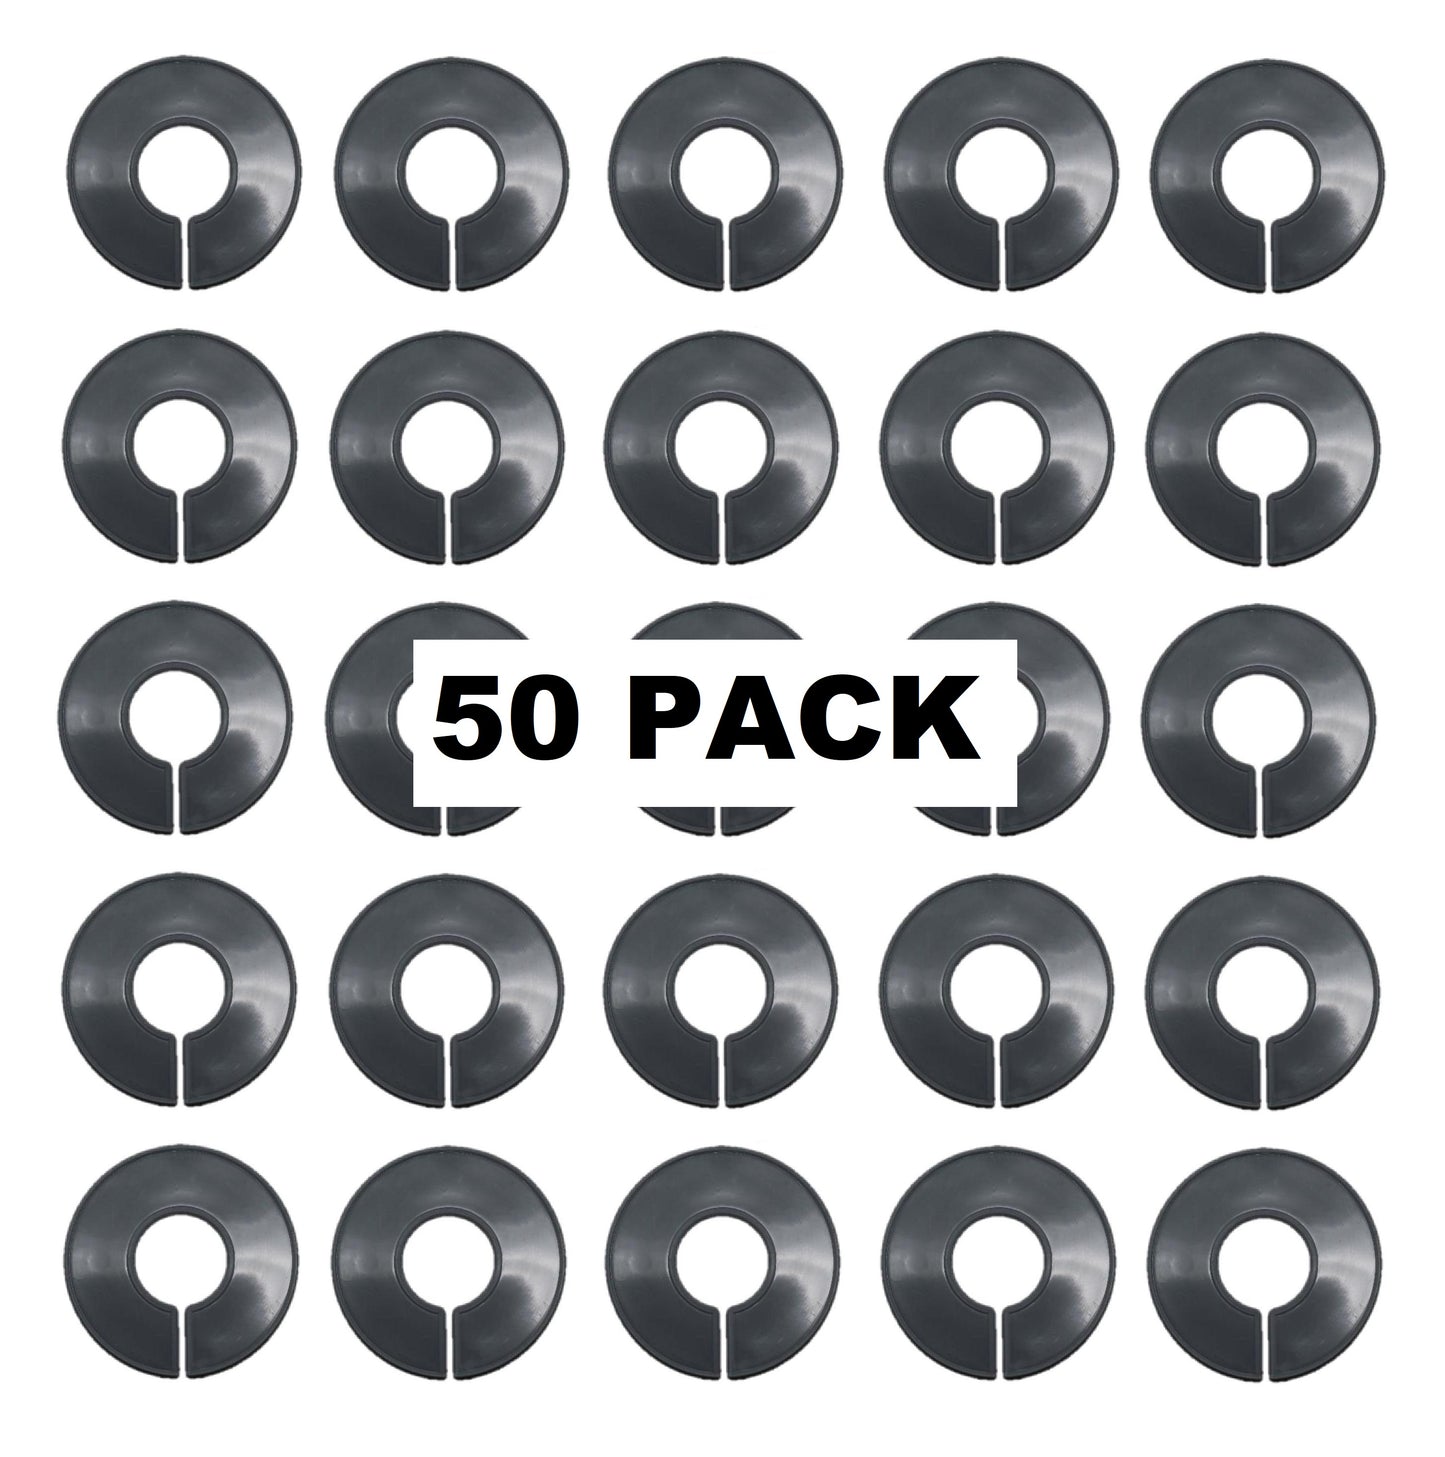 Grey Round Plastic Blank Rack Size Dividers - Multi-Pack